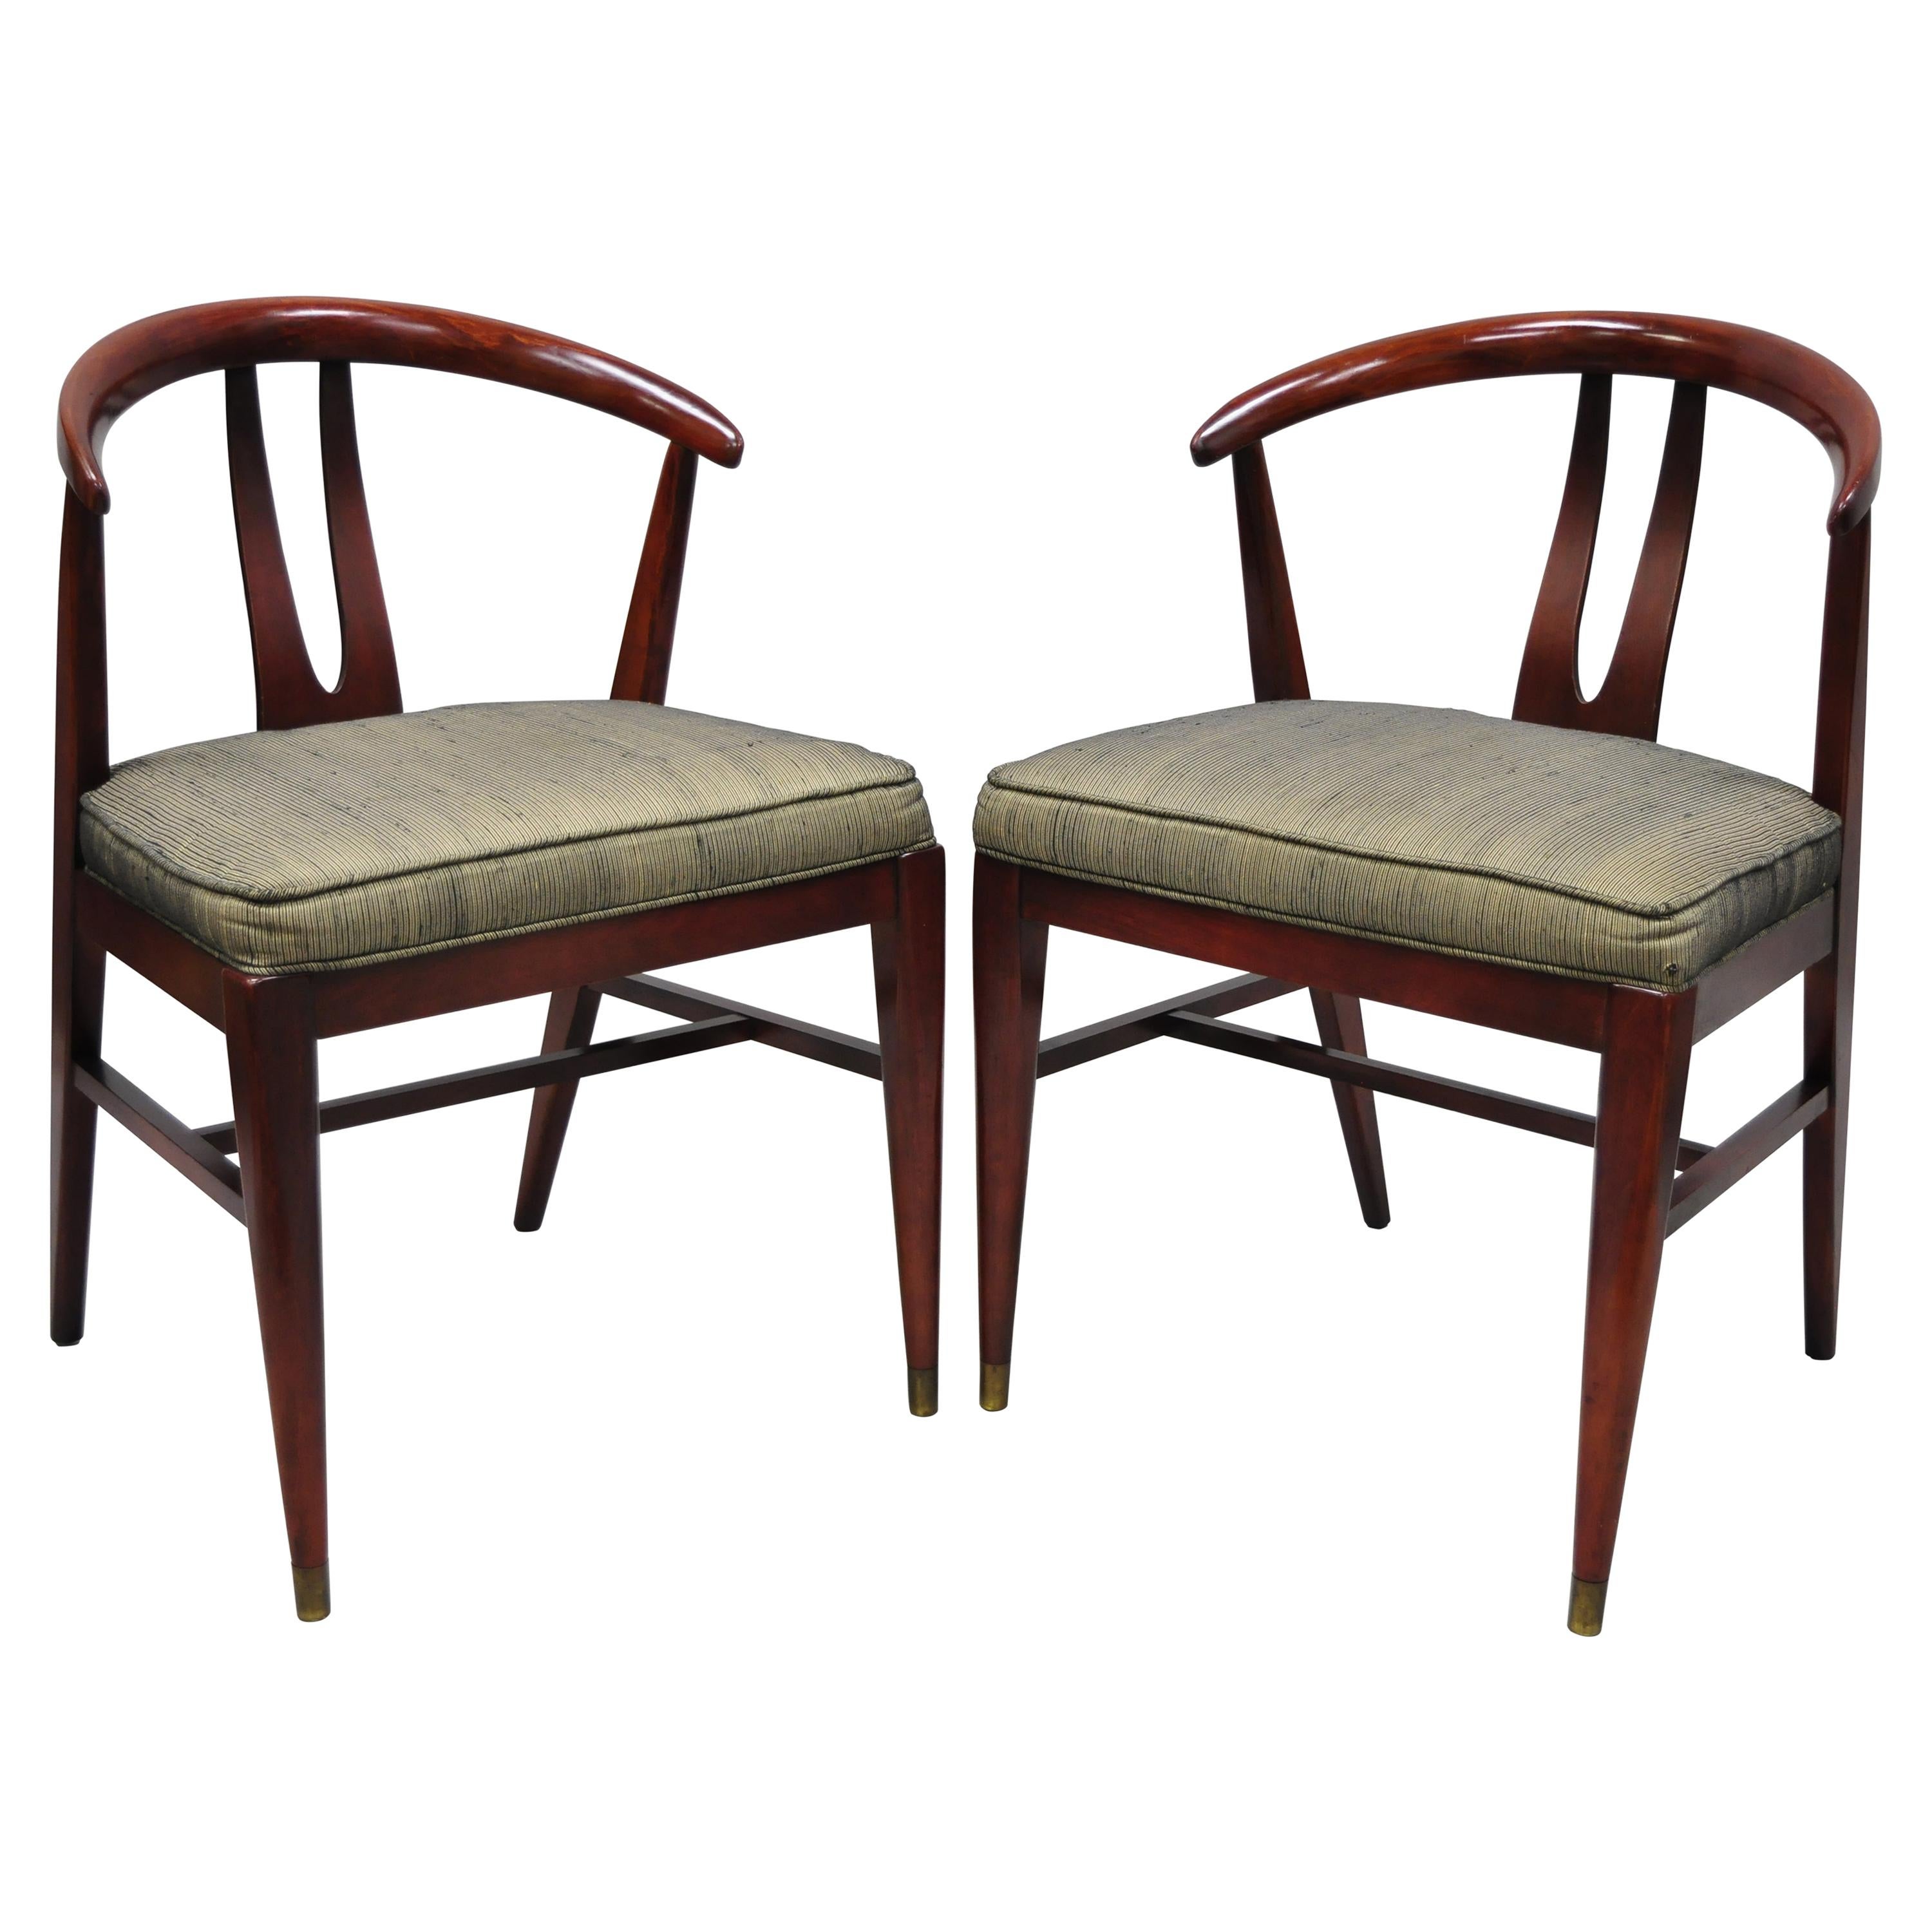 Pair of Vintage Mid-Century Modern Horseshoe Curved Back Mahogany Dining Chairs